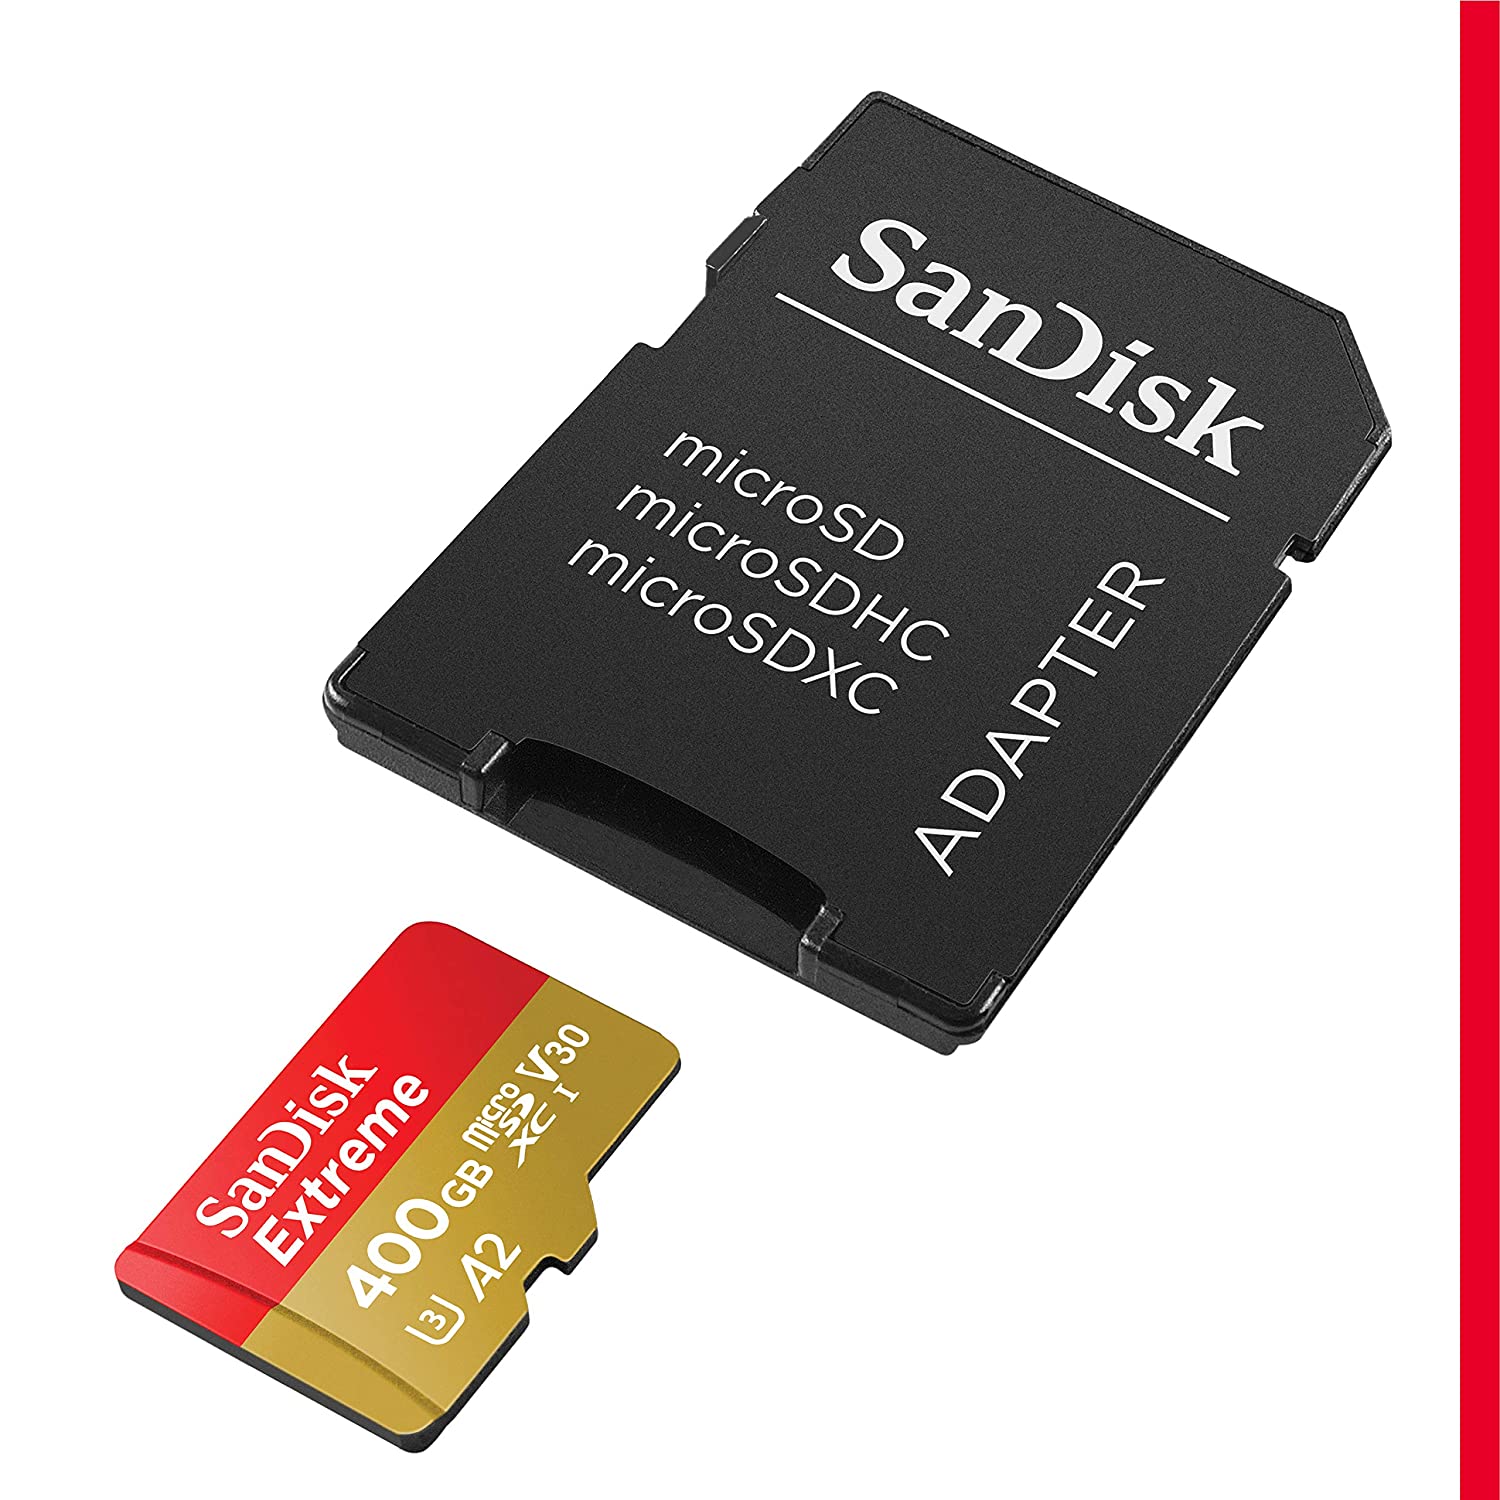 SanDisk Extreme Micro SD-400 GB Memory card-Memory Cards-dealsplant